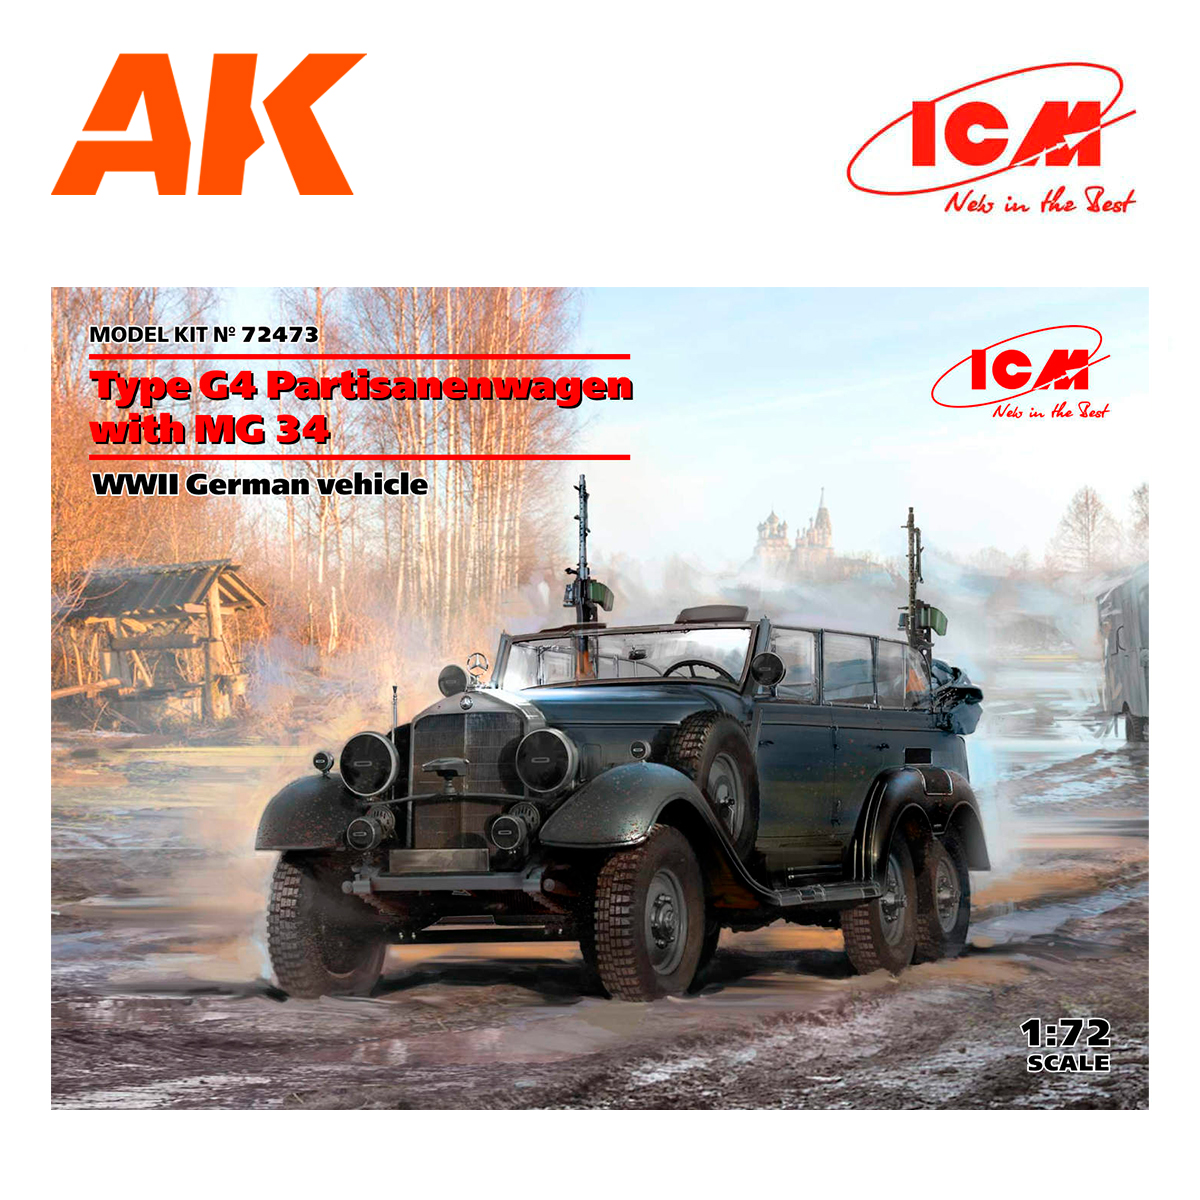 Type G4 Partisanenwagen with MG 34, WWII German vehicle 1/72